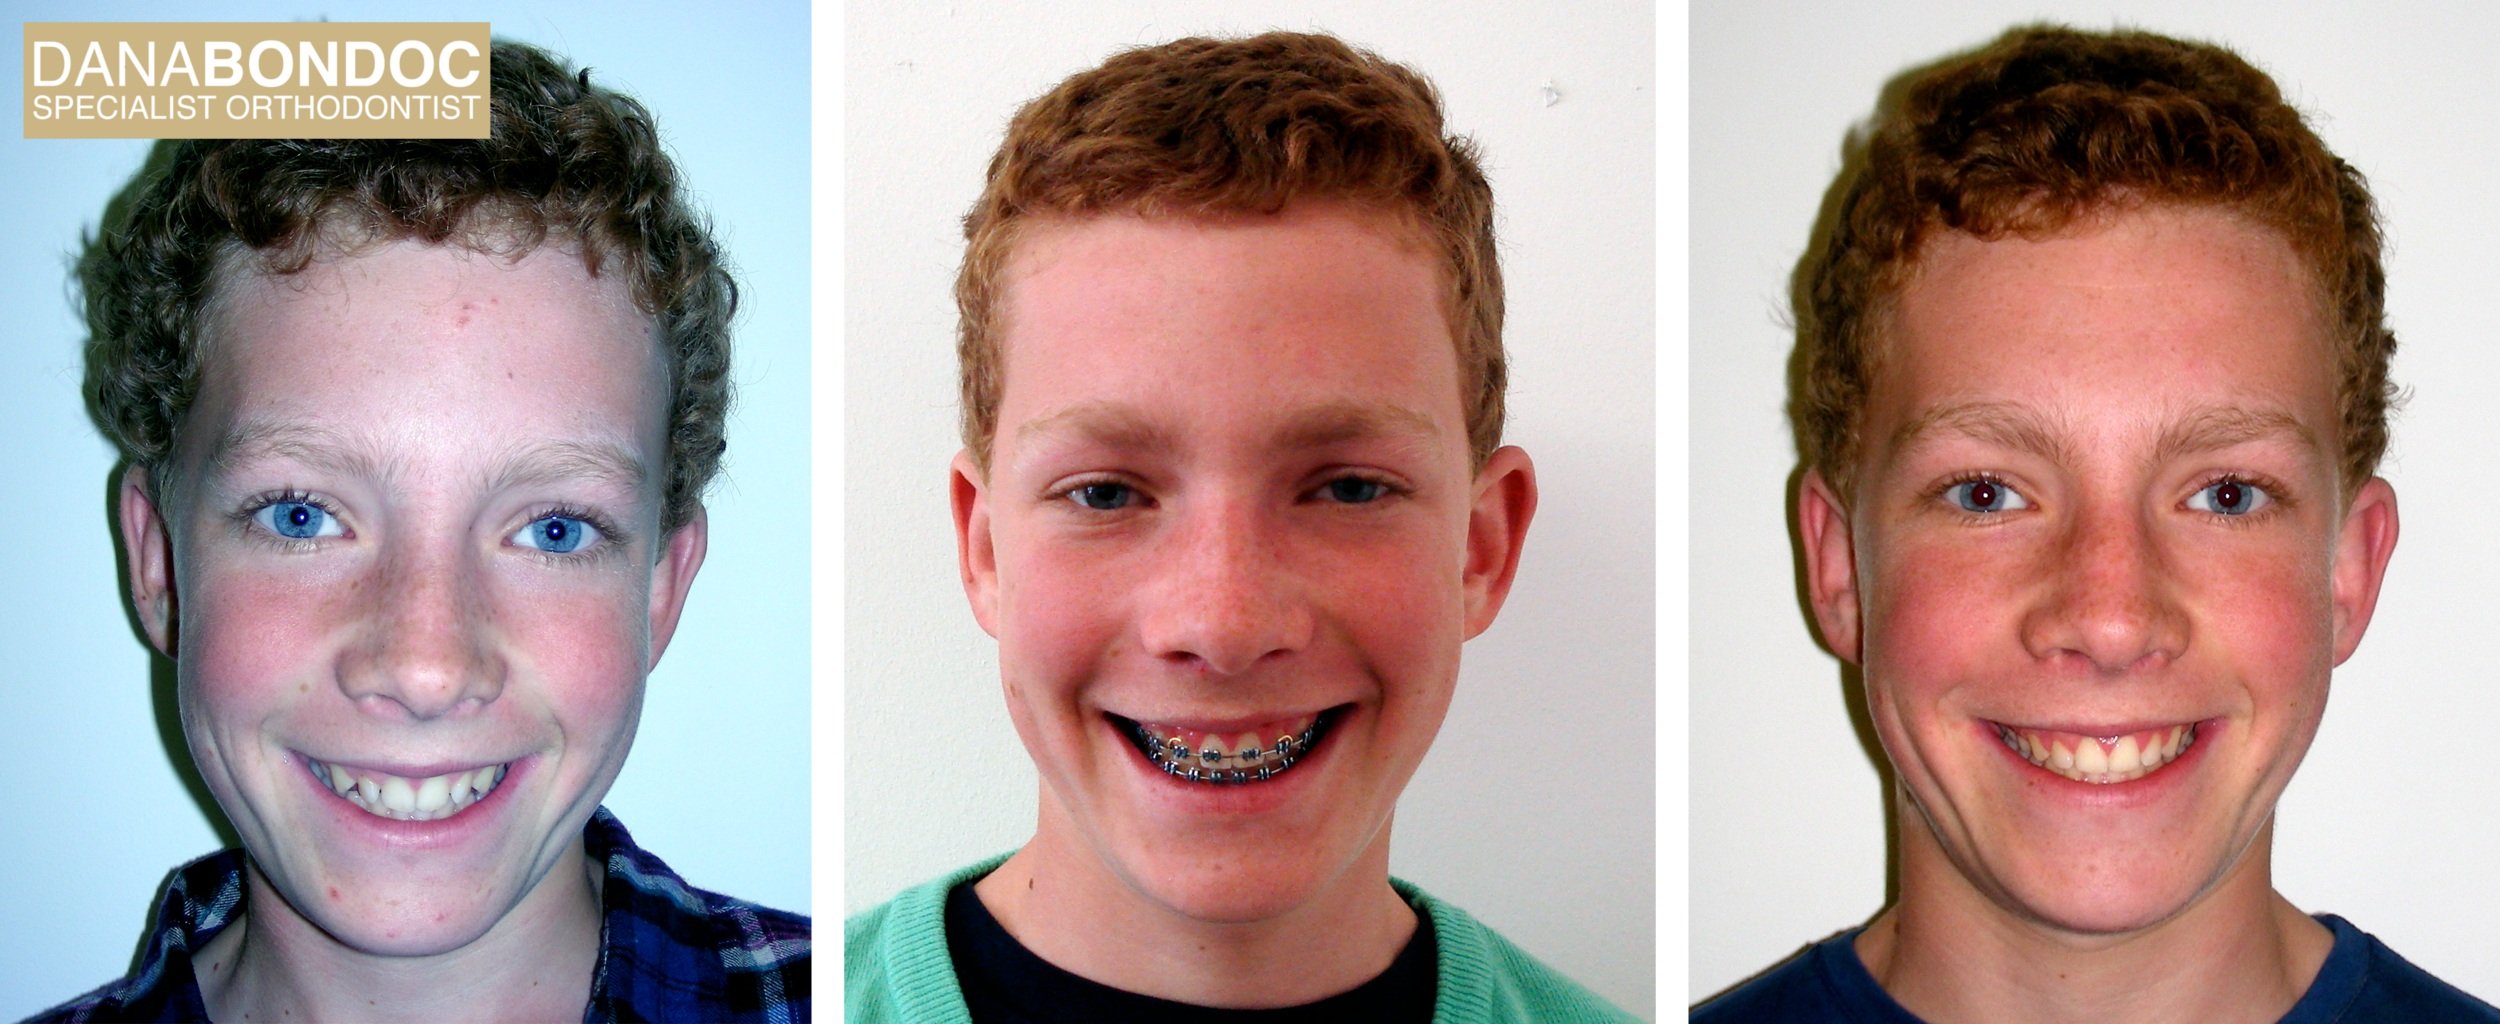 Before treatment, with metal braces on, after treatment photos of a male teenager and written testimonial.